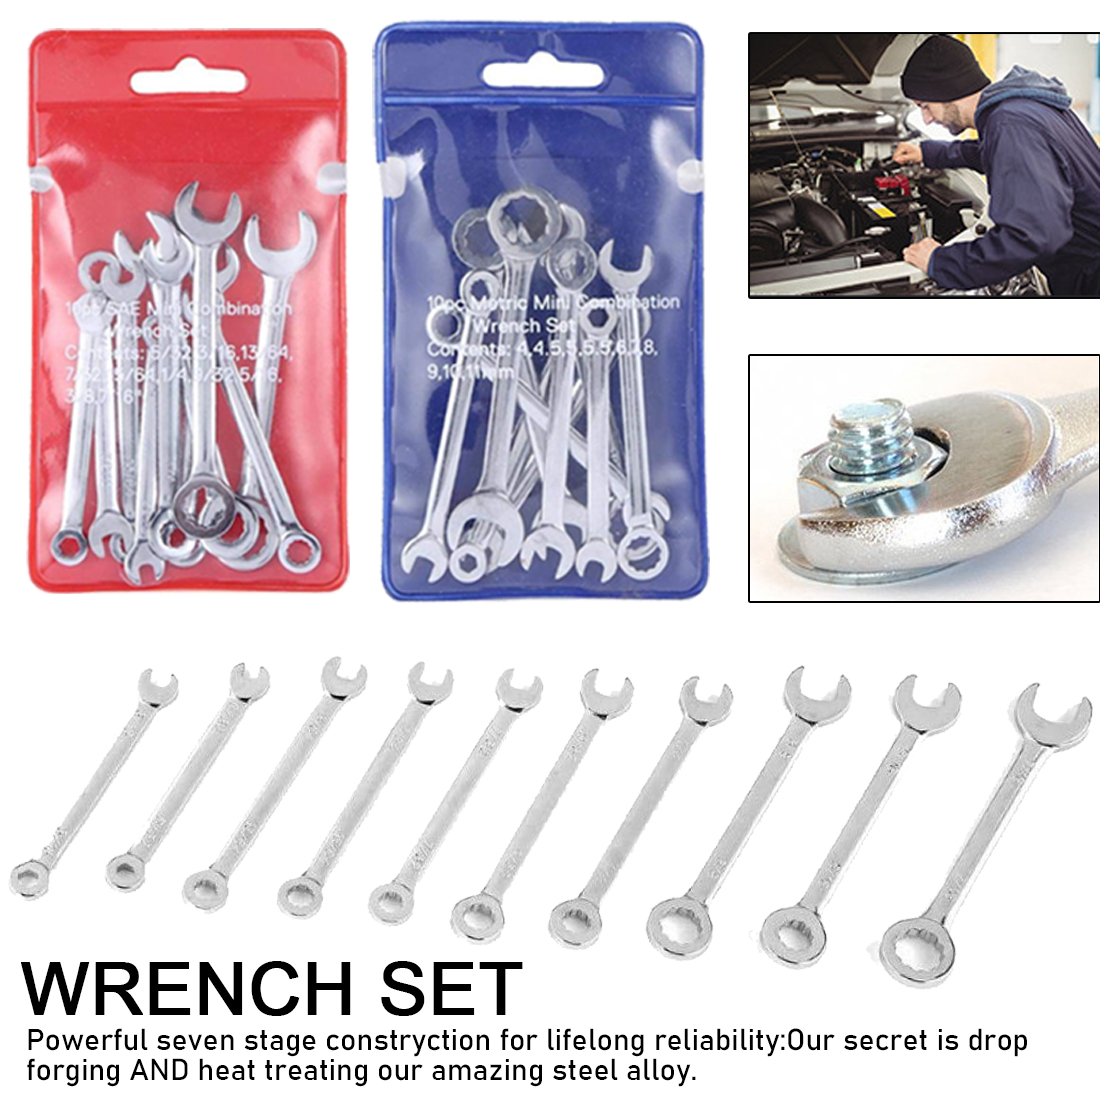 Mini Combination Wrench Spanner Set Double End 3/16-7/16 inch 10pcs/Pack